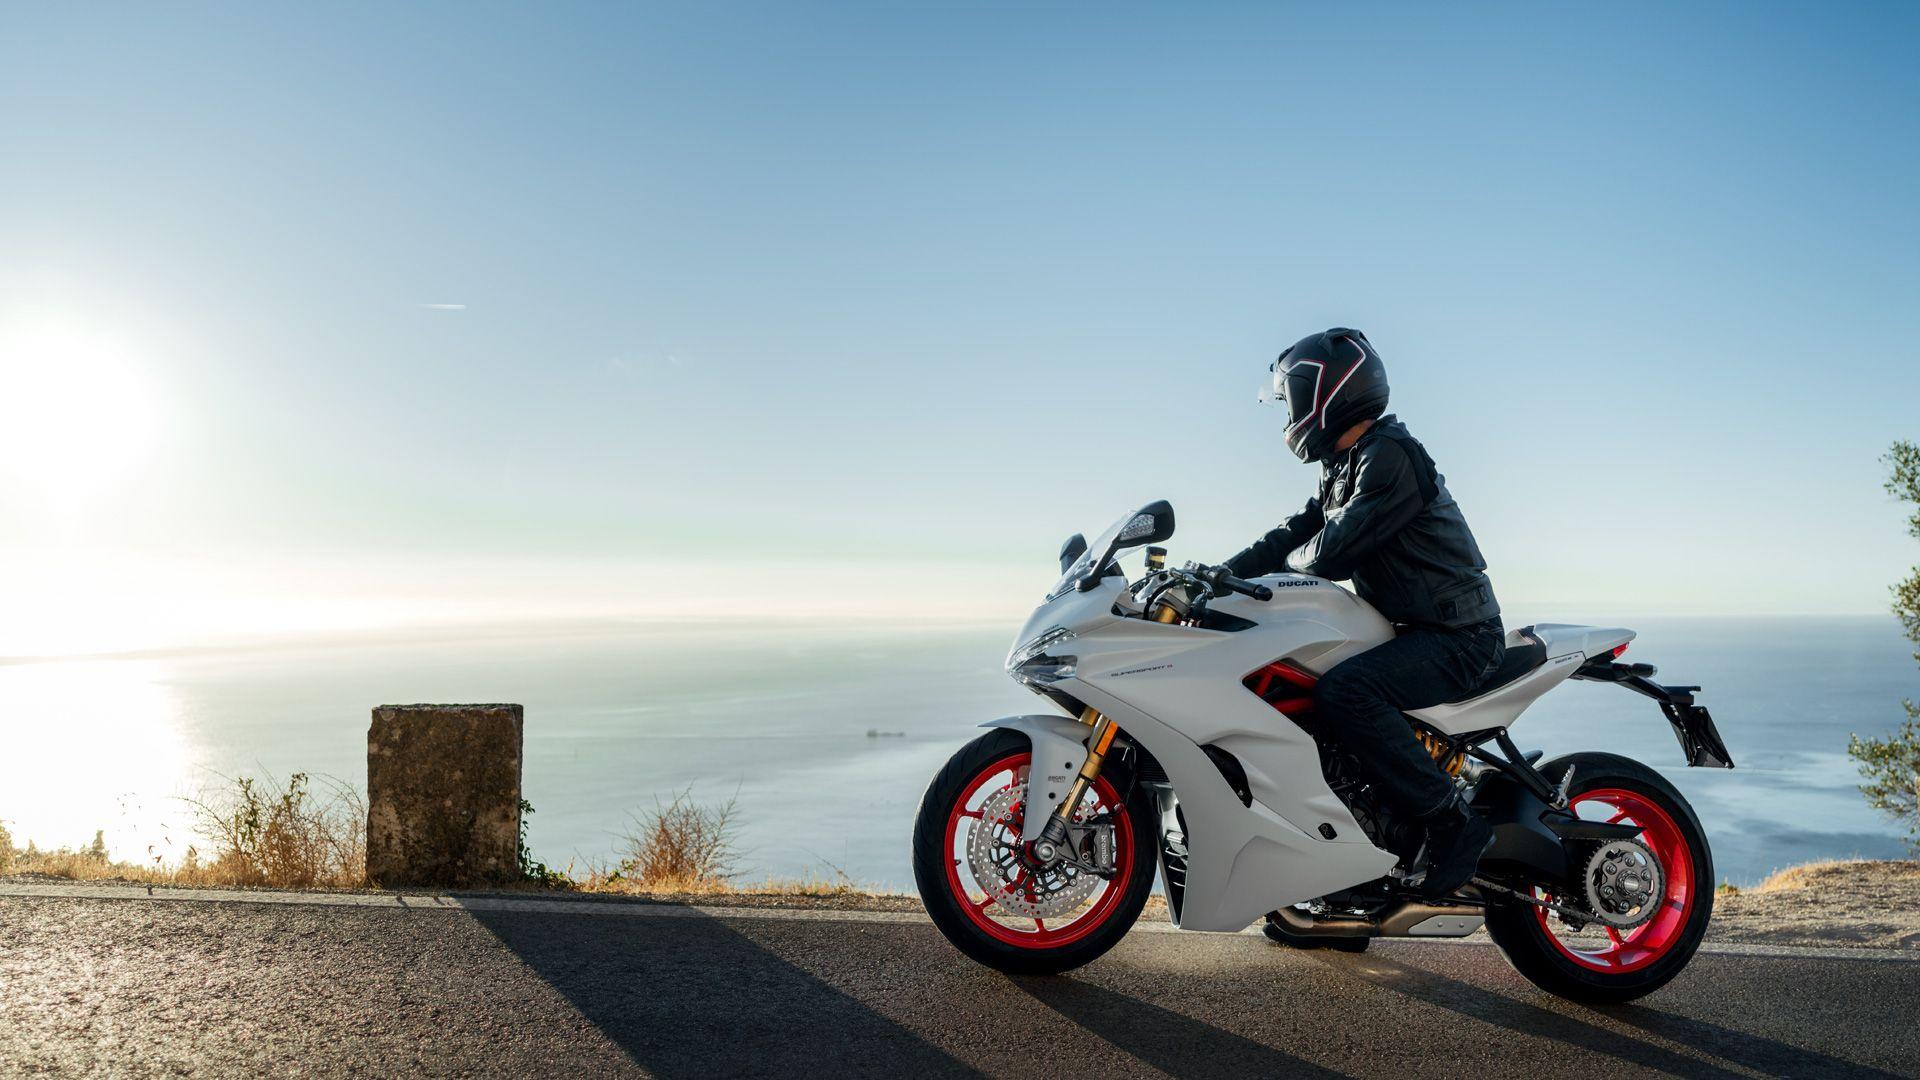 Ducati SuperSport: the energy of sport wherever it goes